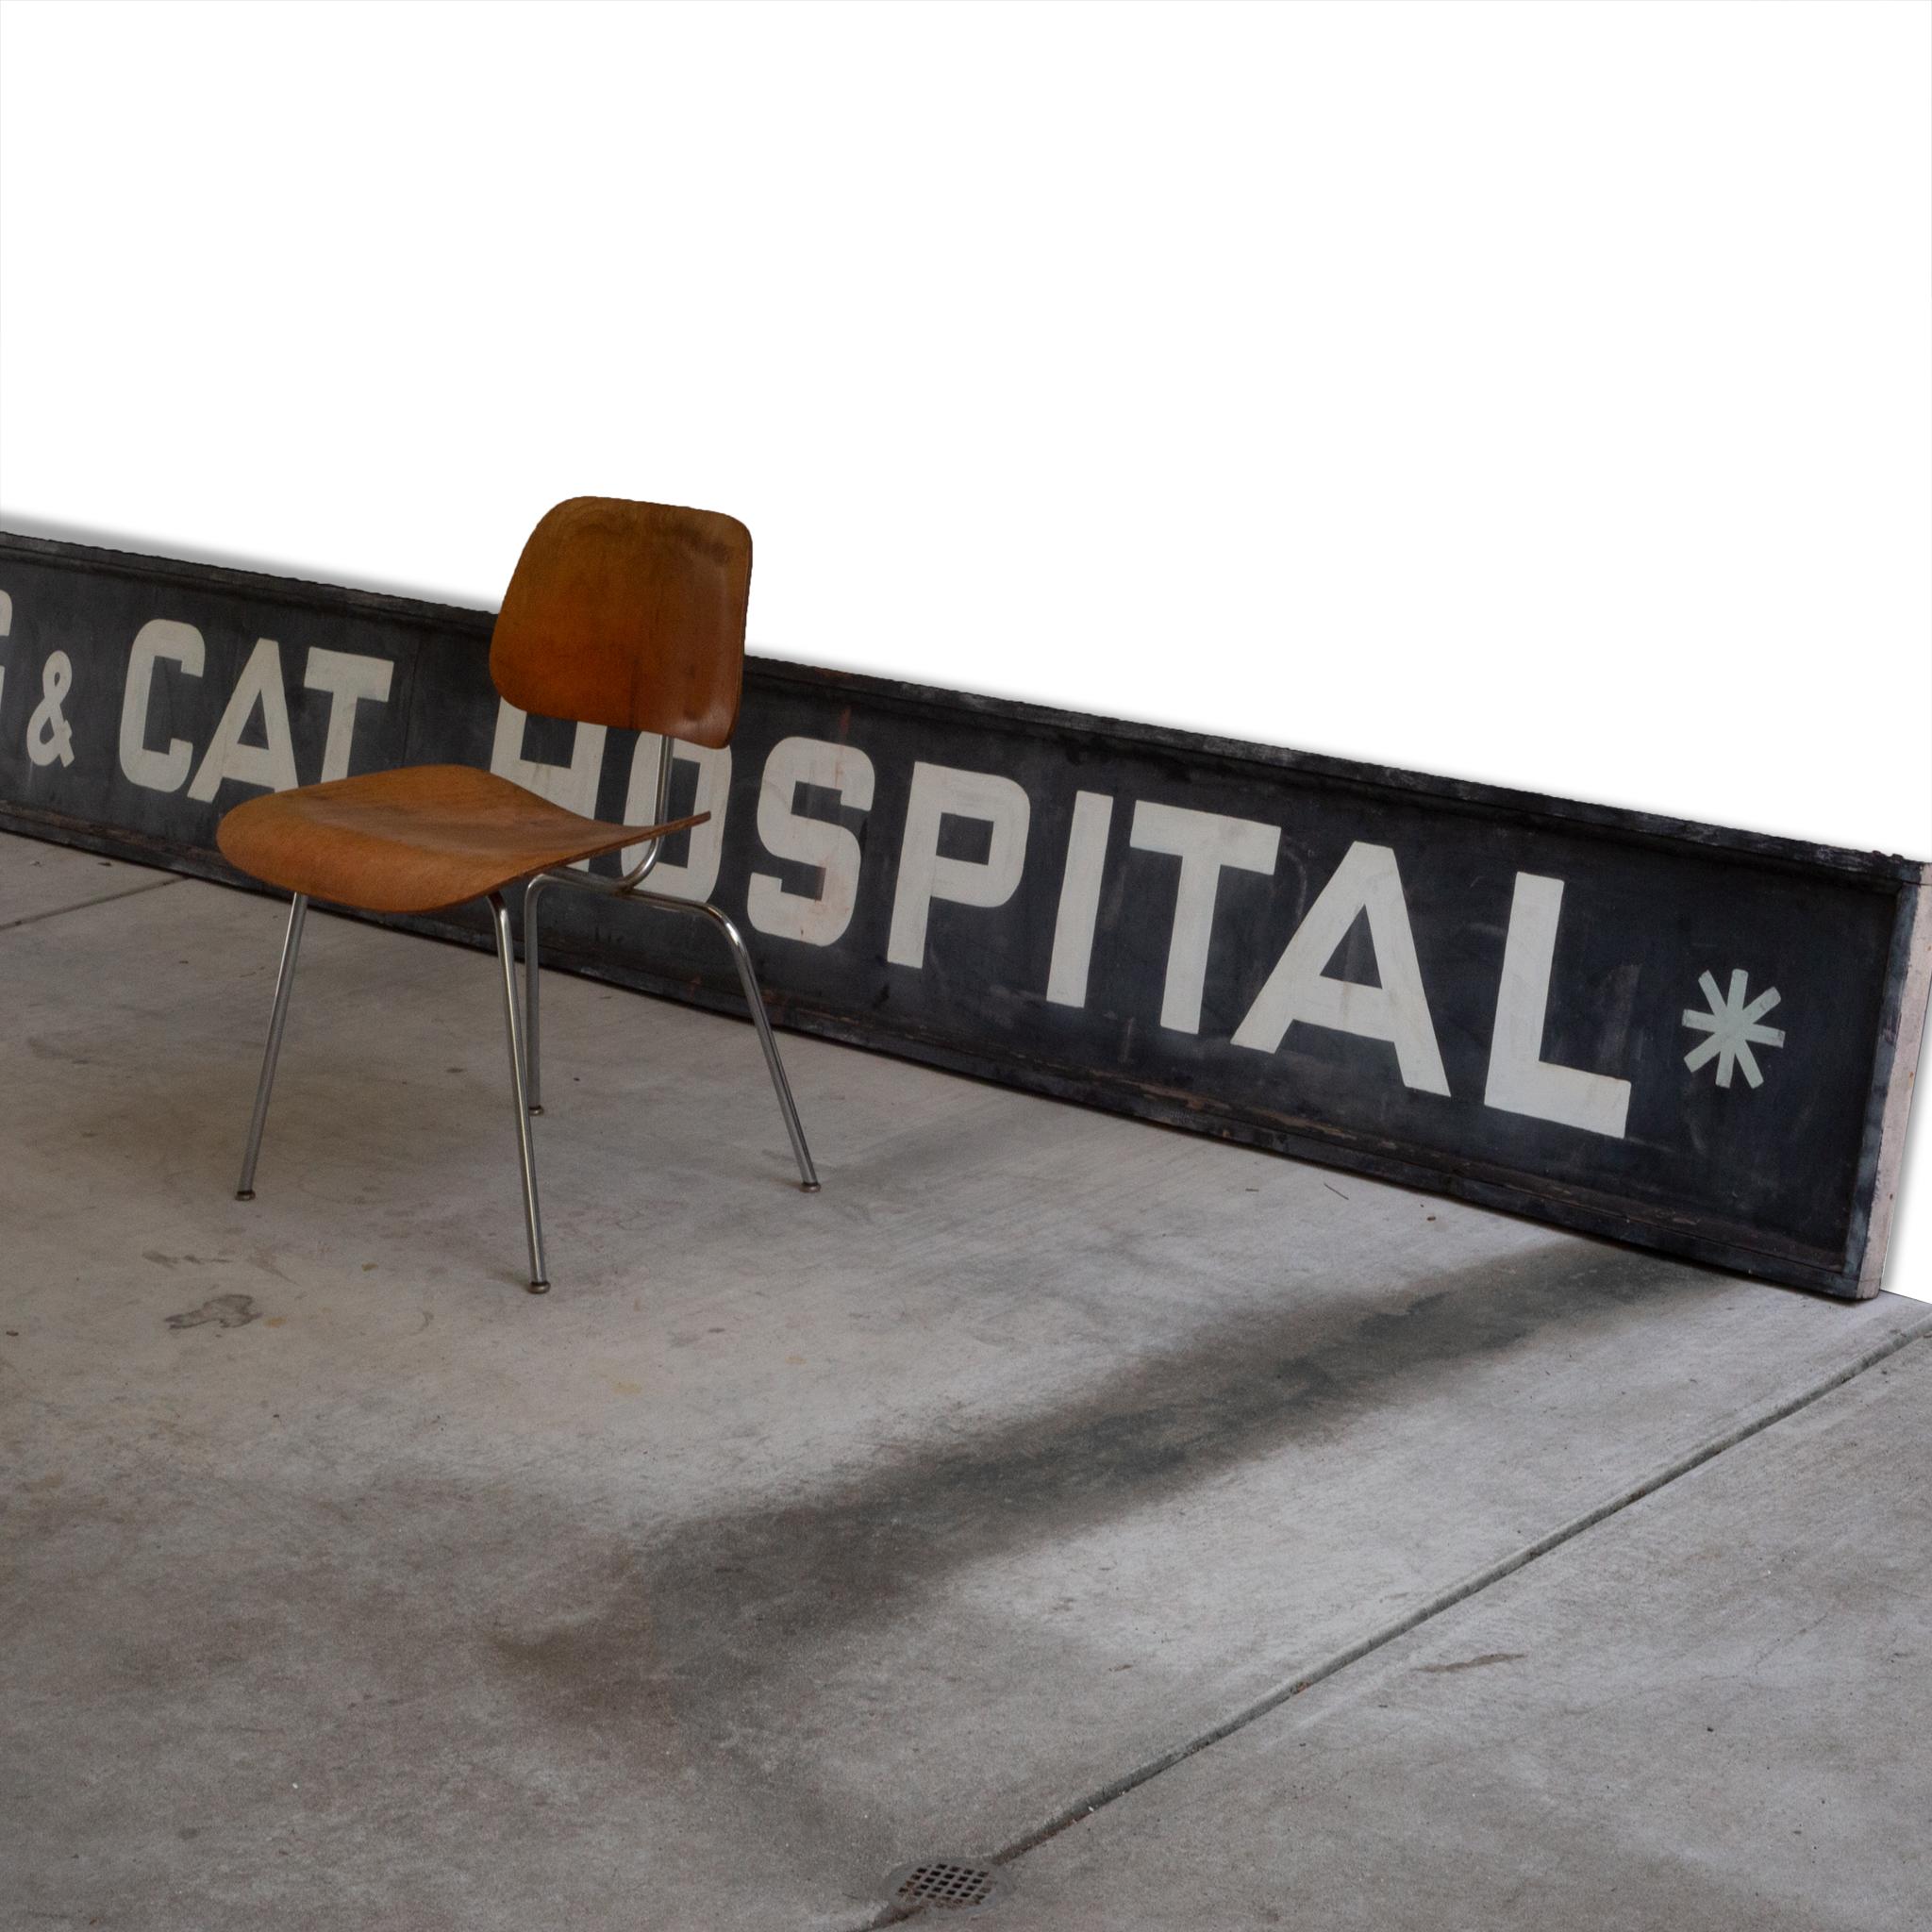 About

This is an original monumental, 17 foot hand painted metal sign in a wooden frame that hung outside the Veterinarian Hospital in Oakland, California since 1930. The sign is one sided and shows some wear consistent with age and use.

Contact